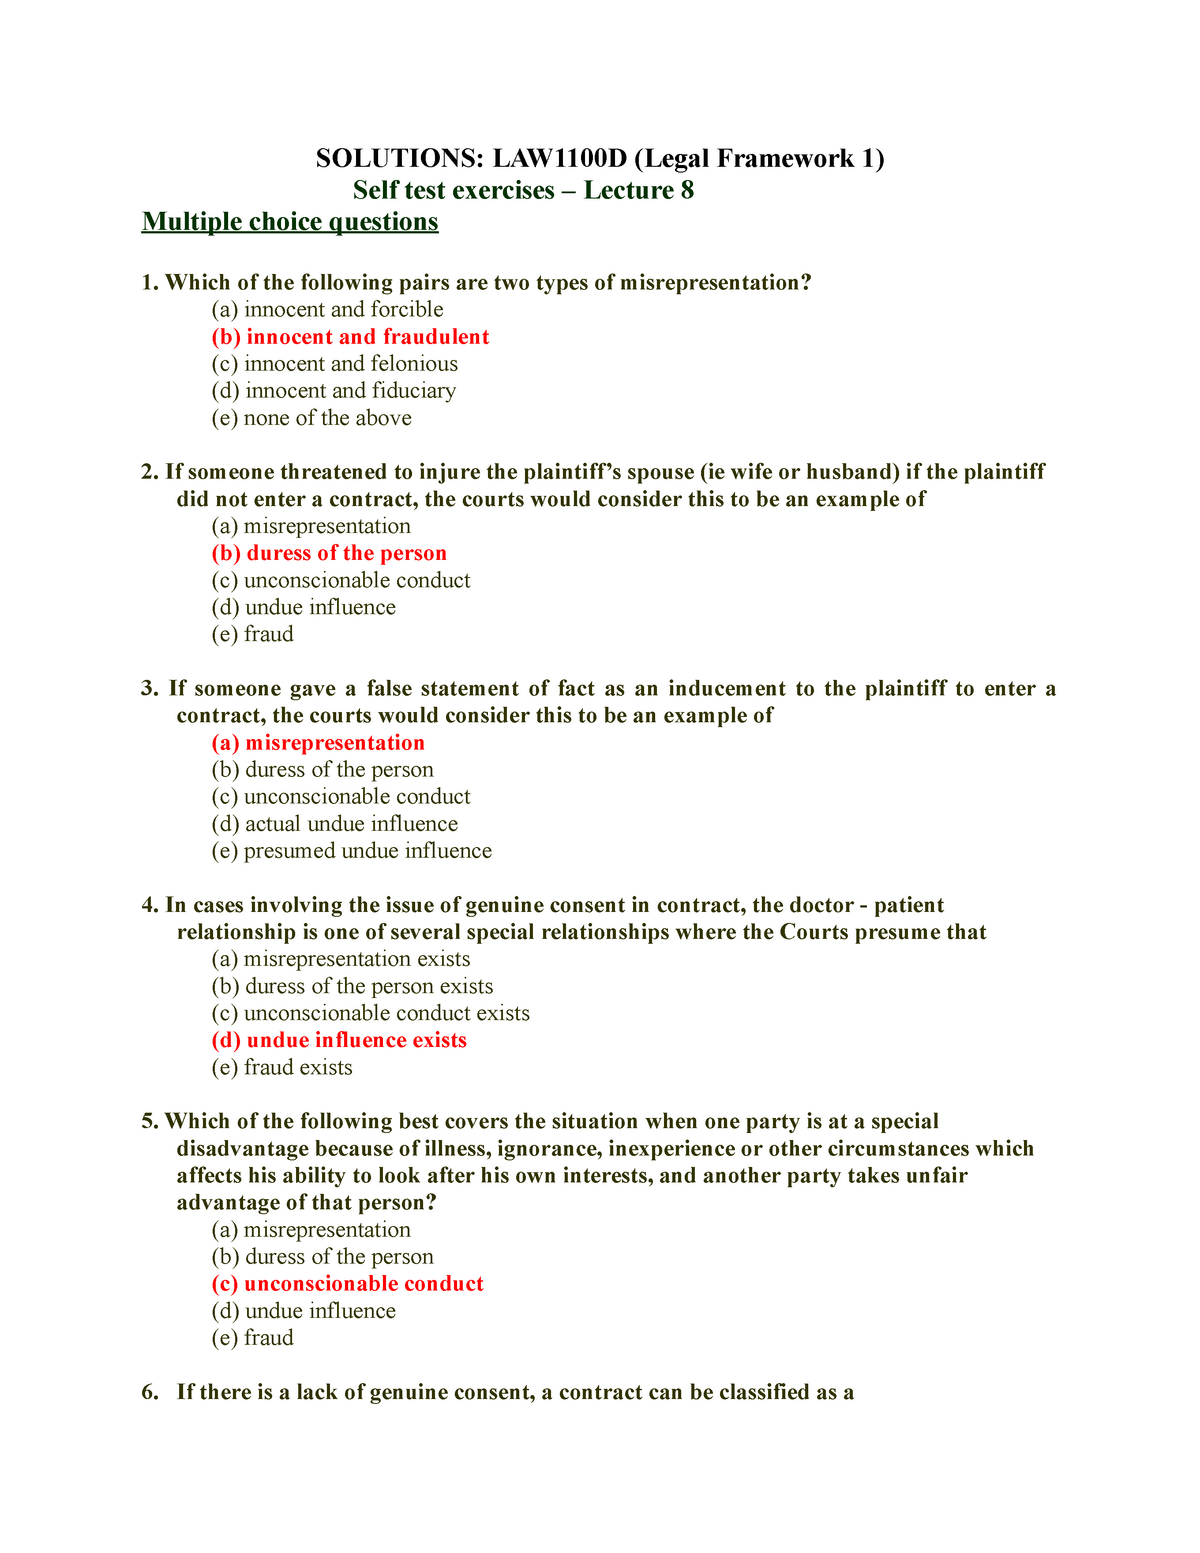 Law1100 Legal Framework 1 Self Test Exercises Lecture 8 Law